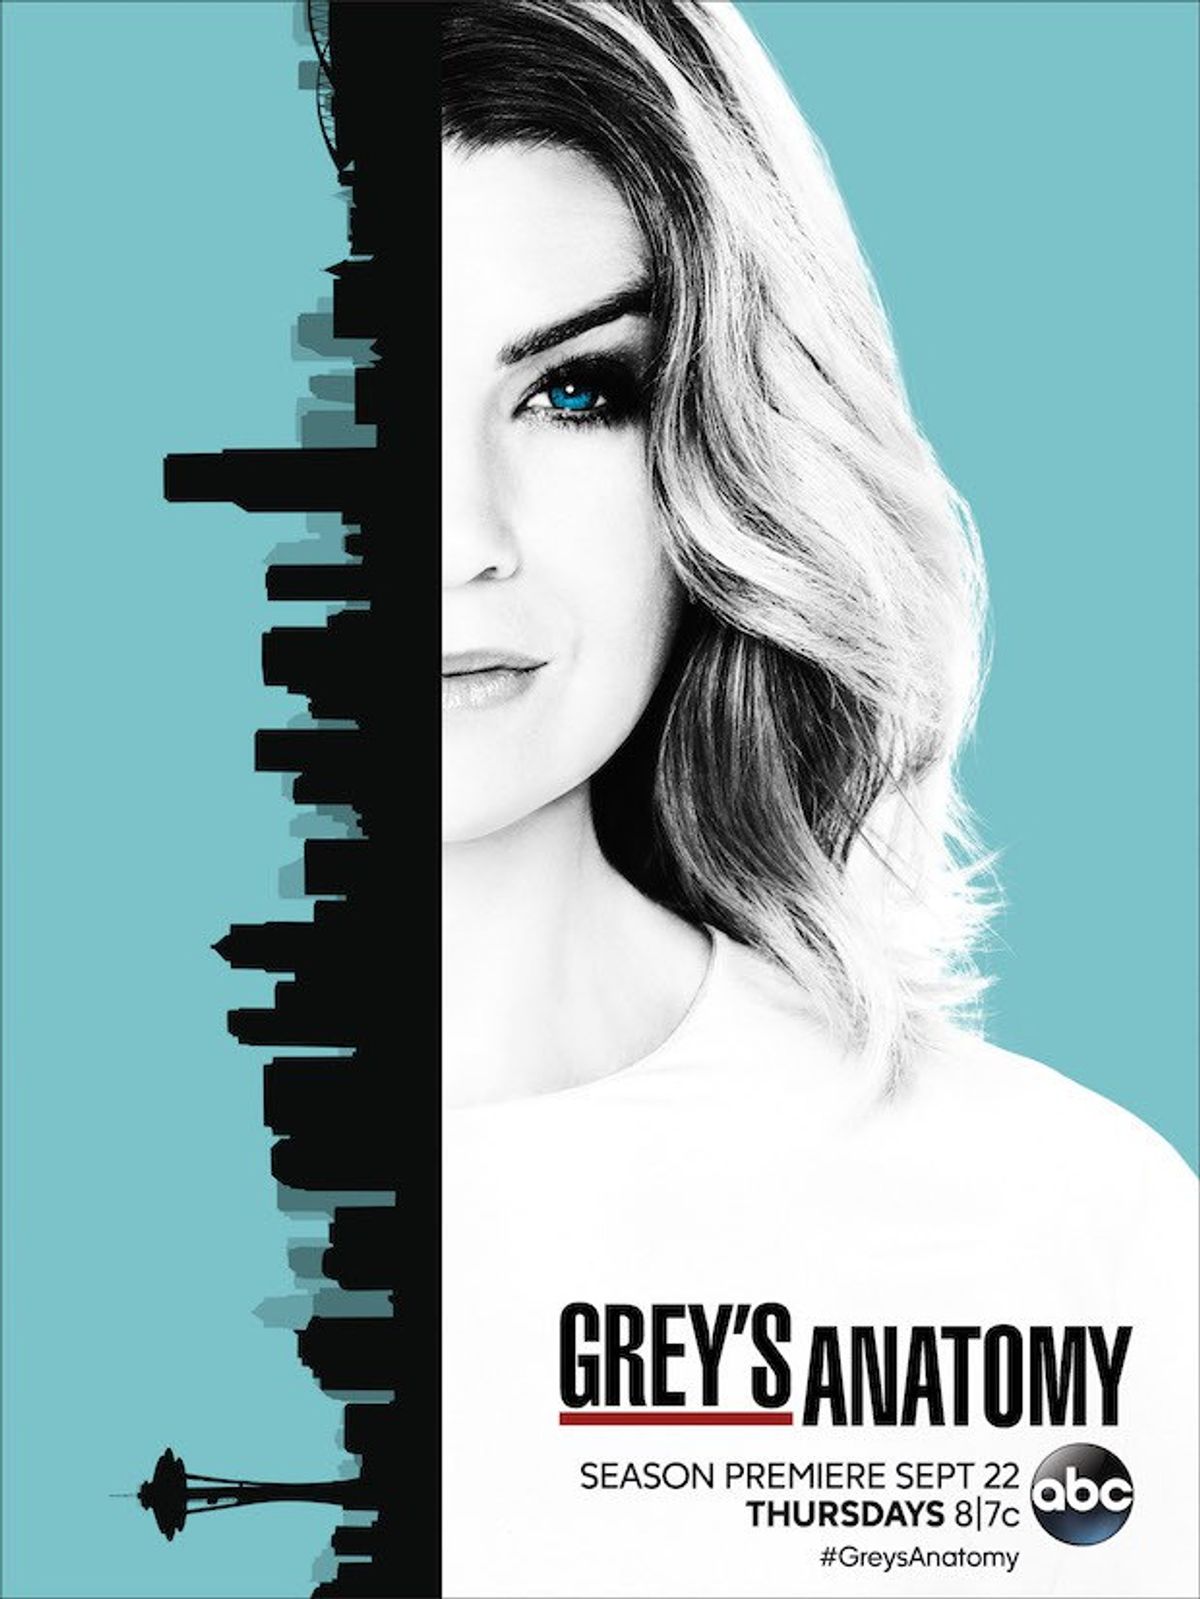 Top 10 Things You Should Know About Grey's Anatomy